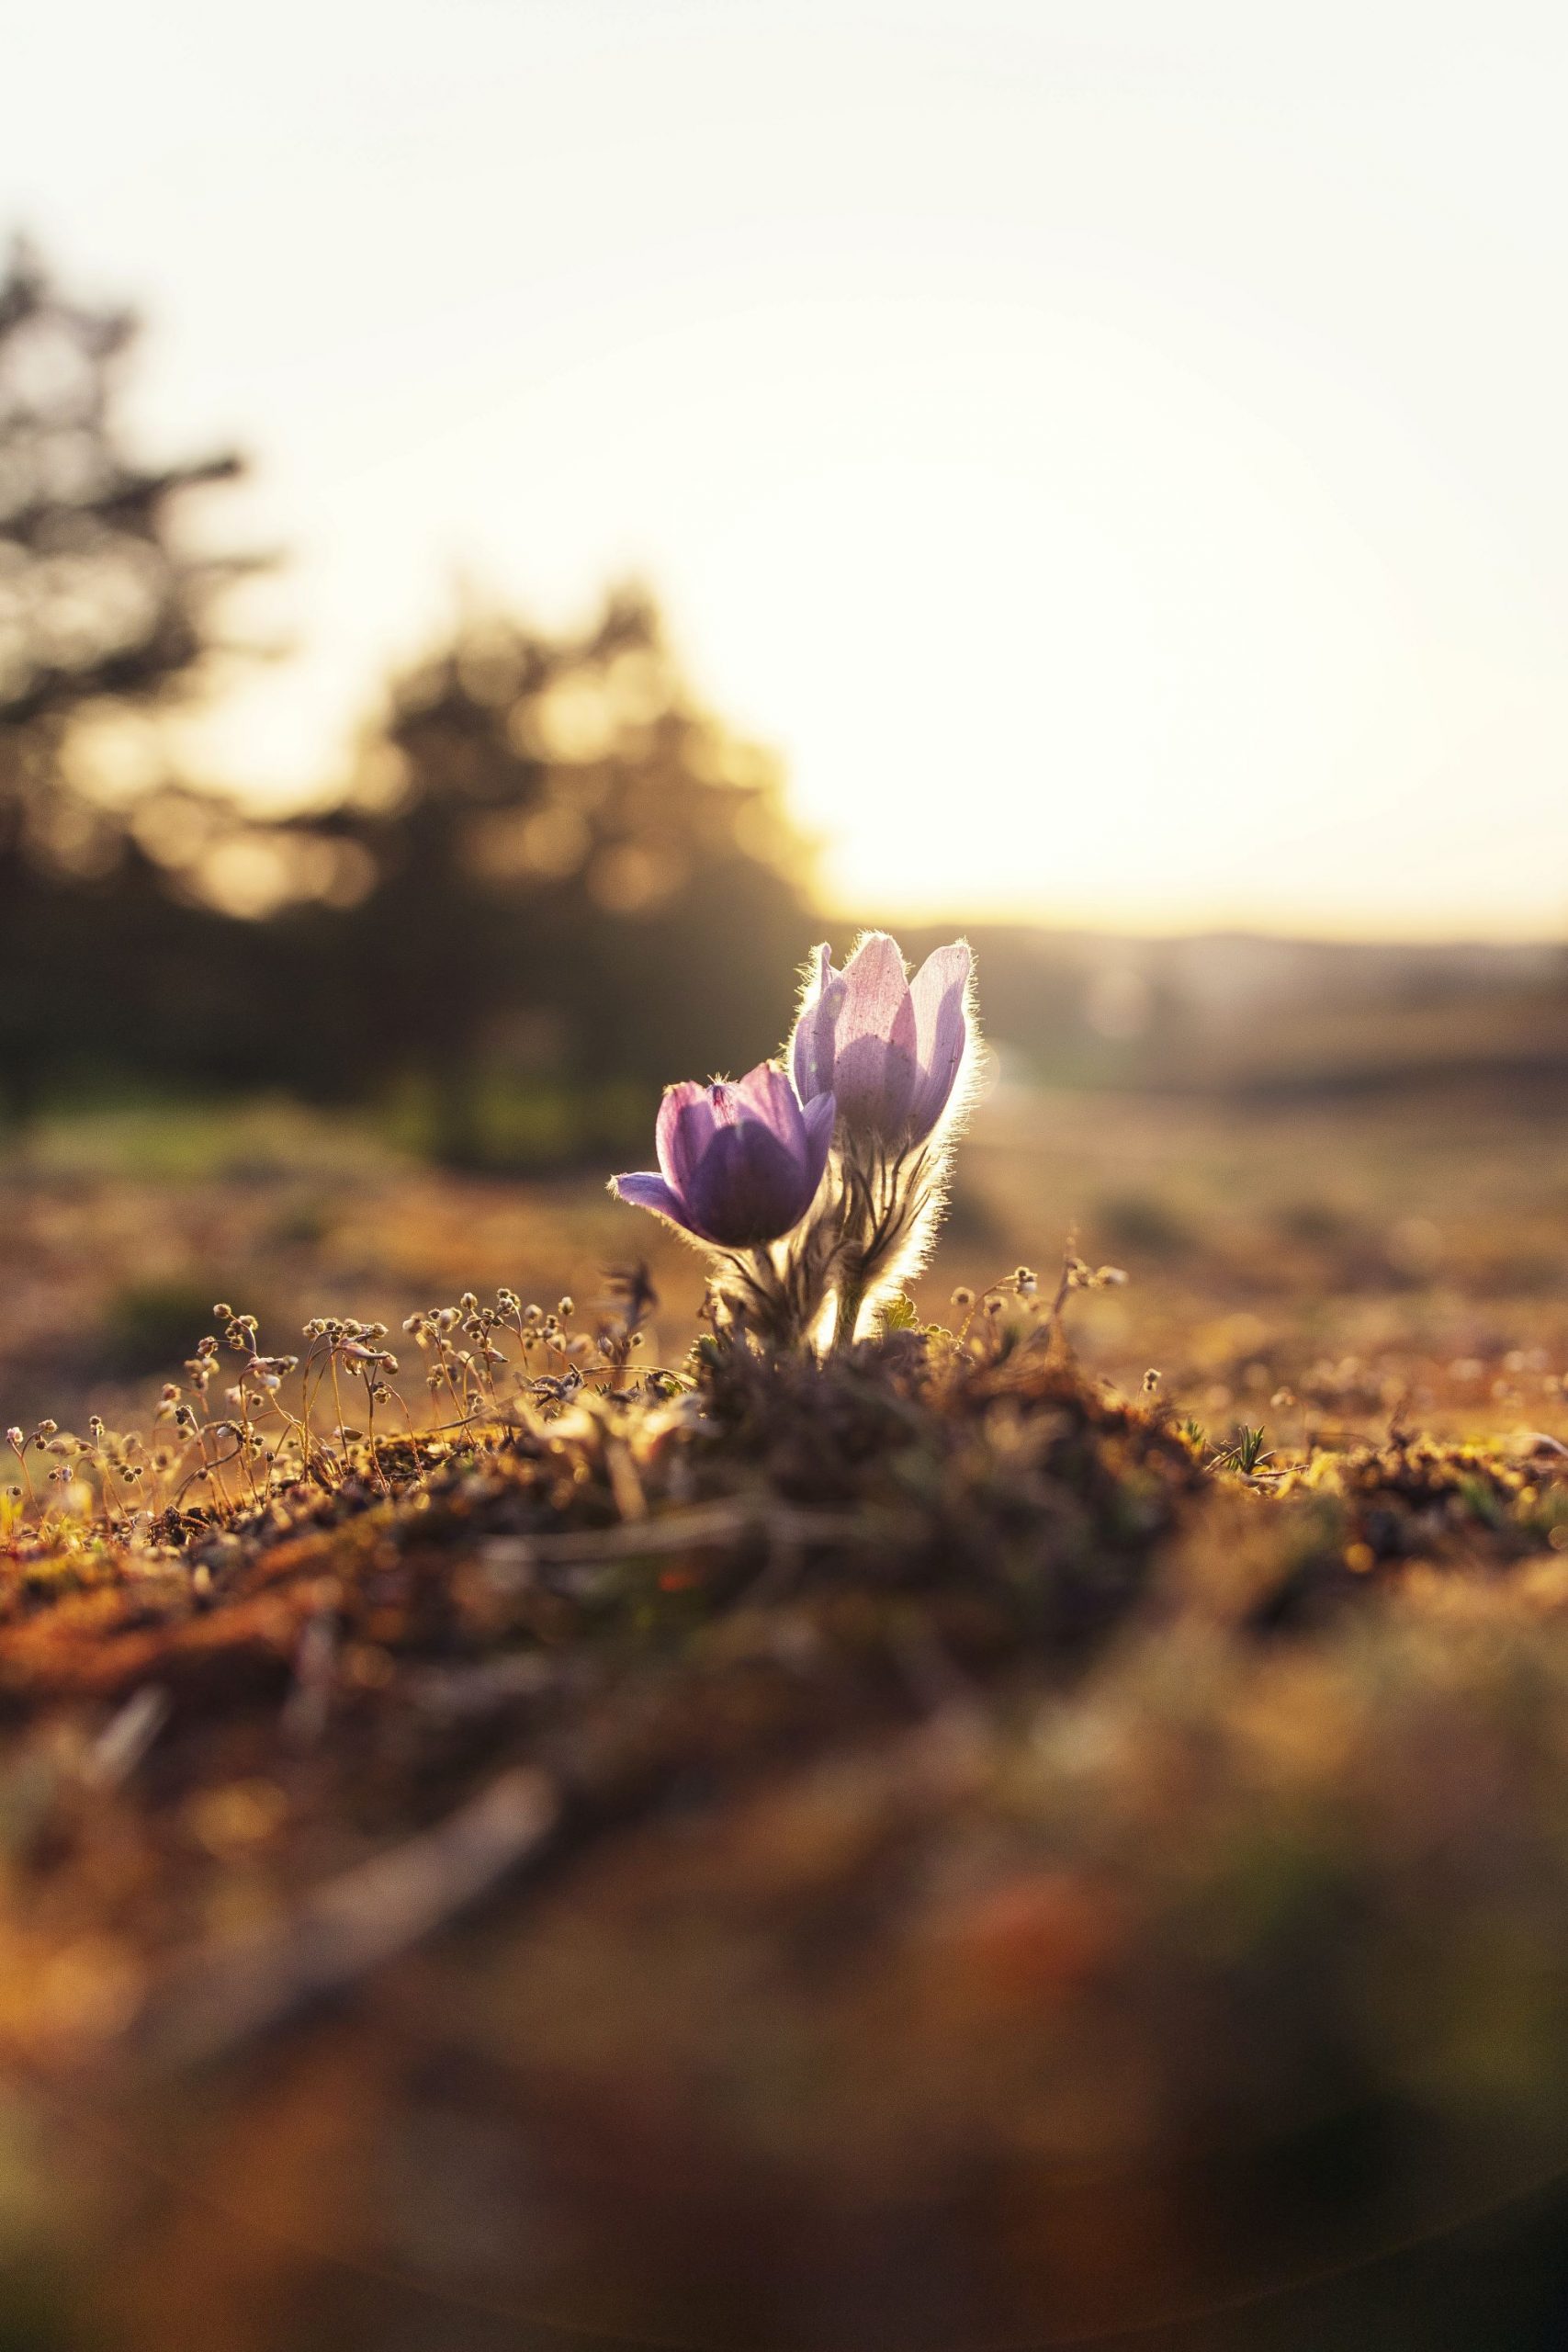 Copywriting services. Spring flower pushing through the earth